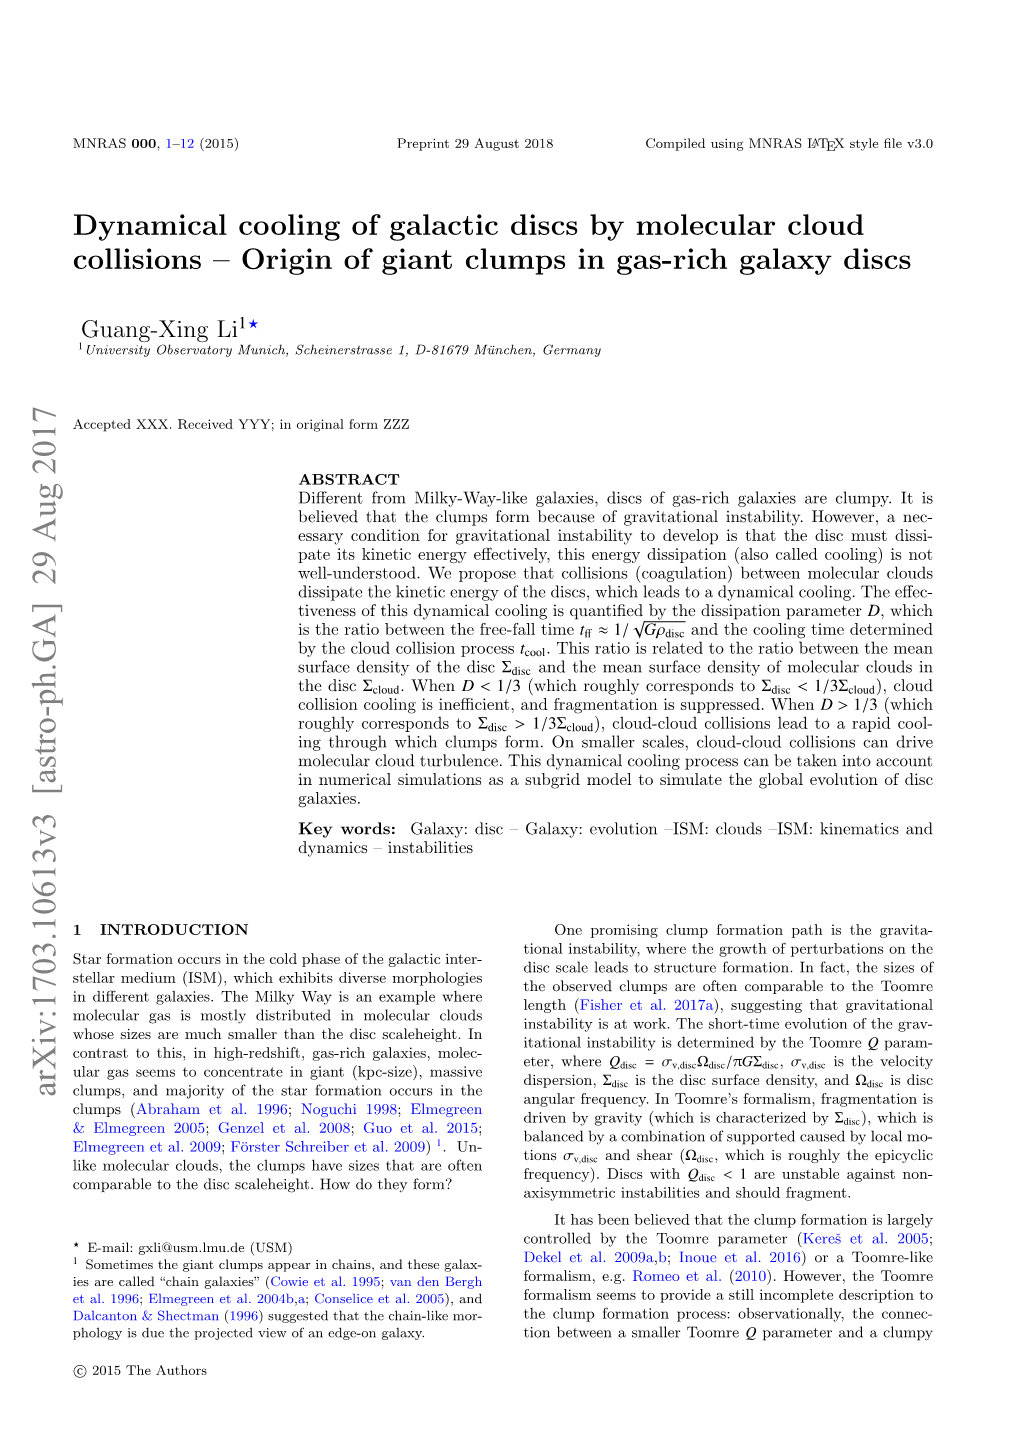 Dynamical Cooling of Galactic Discs by Molecular Cloud Collisions--Origin Of